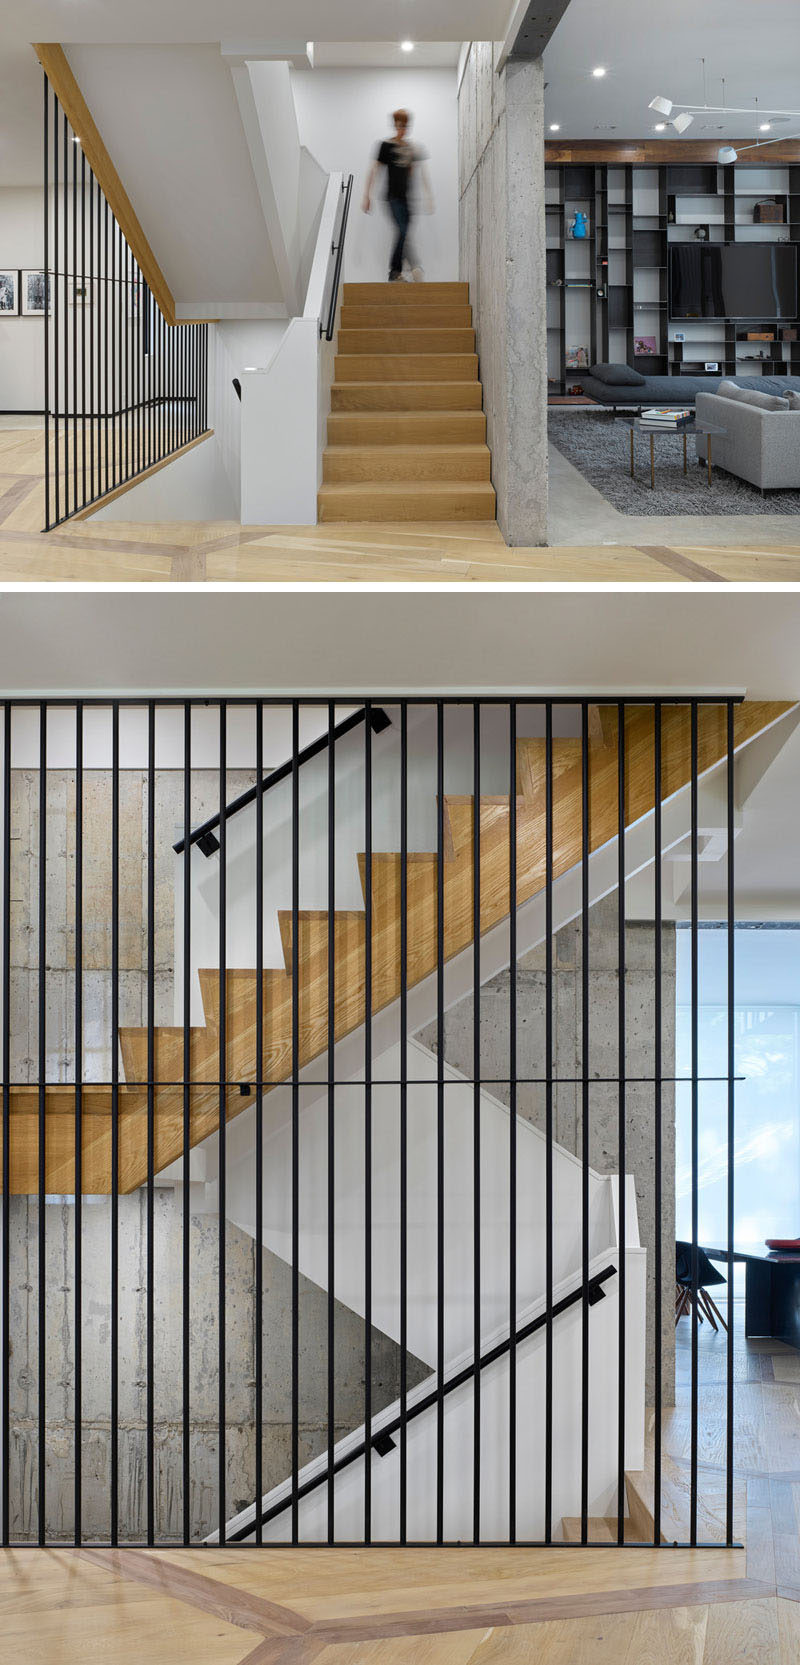 Wood, steel and concrete have been paired with white walls for a contemporary looking staircase.